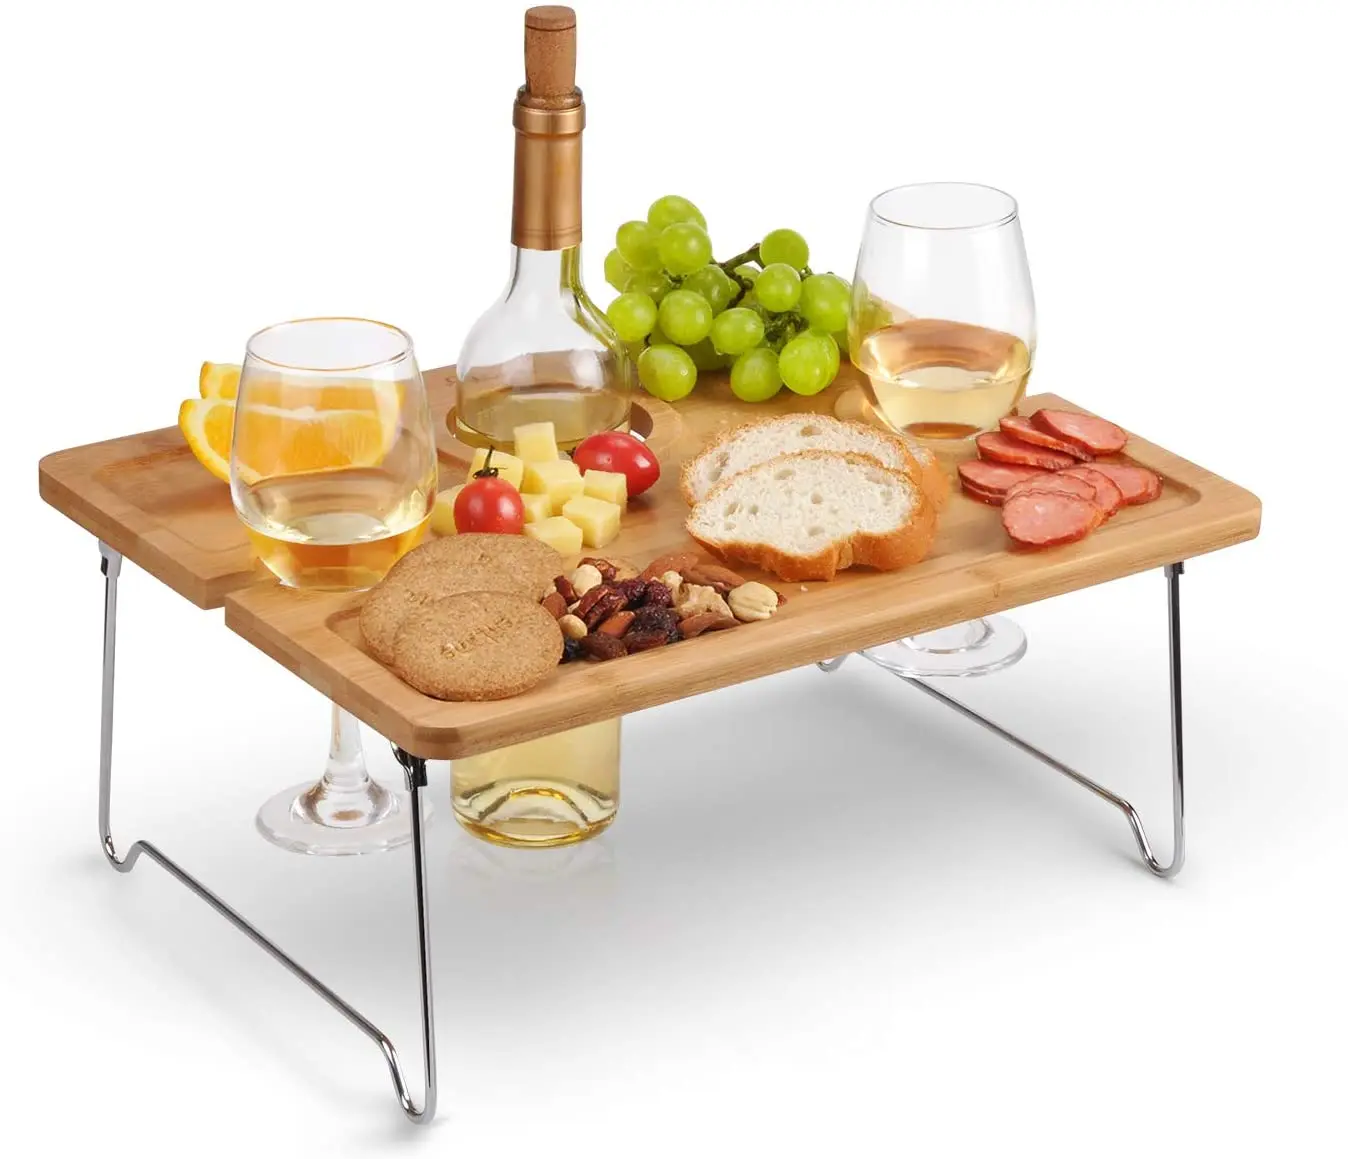 Outdoor Wine Picnic Table Folding Portable Wooden Snack & Cheese Tray with 4 Wine Glasses Holder Suitable for Concerts in Parks Beaches Ideal Wine Lover Gift 